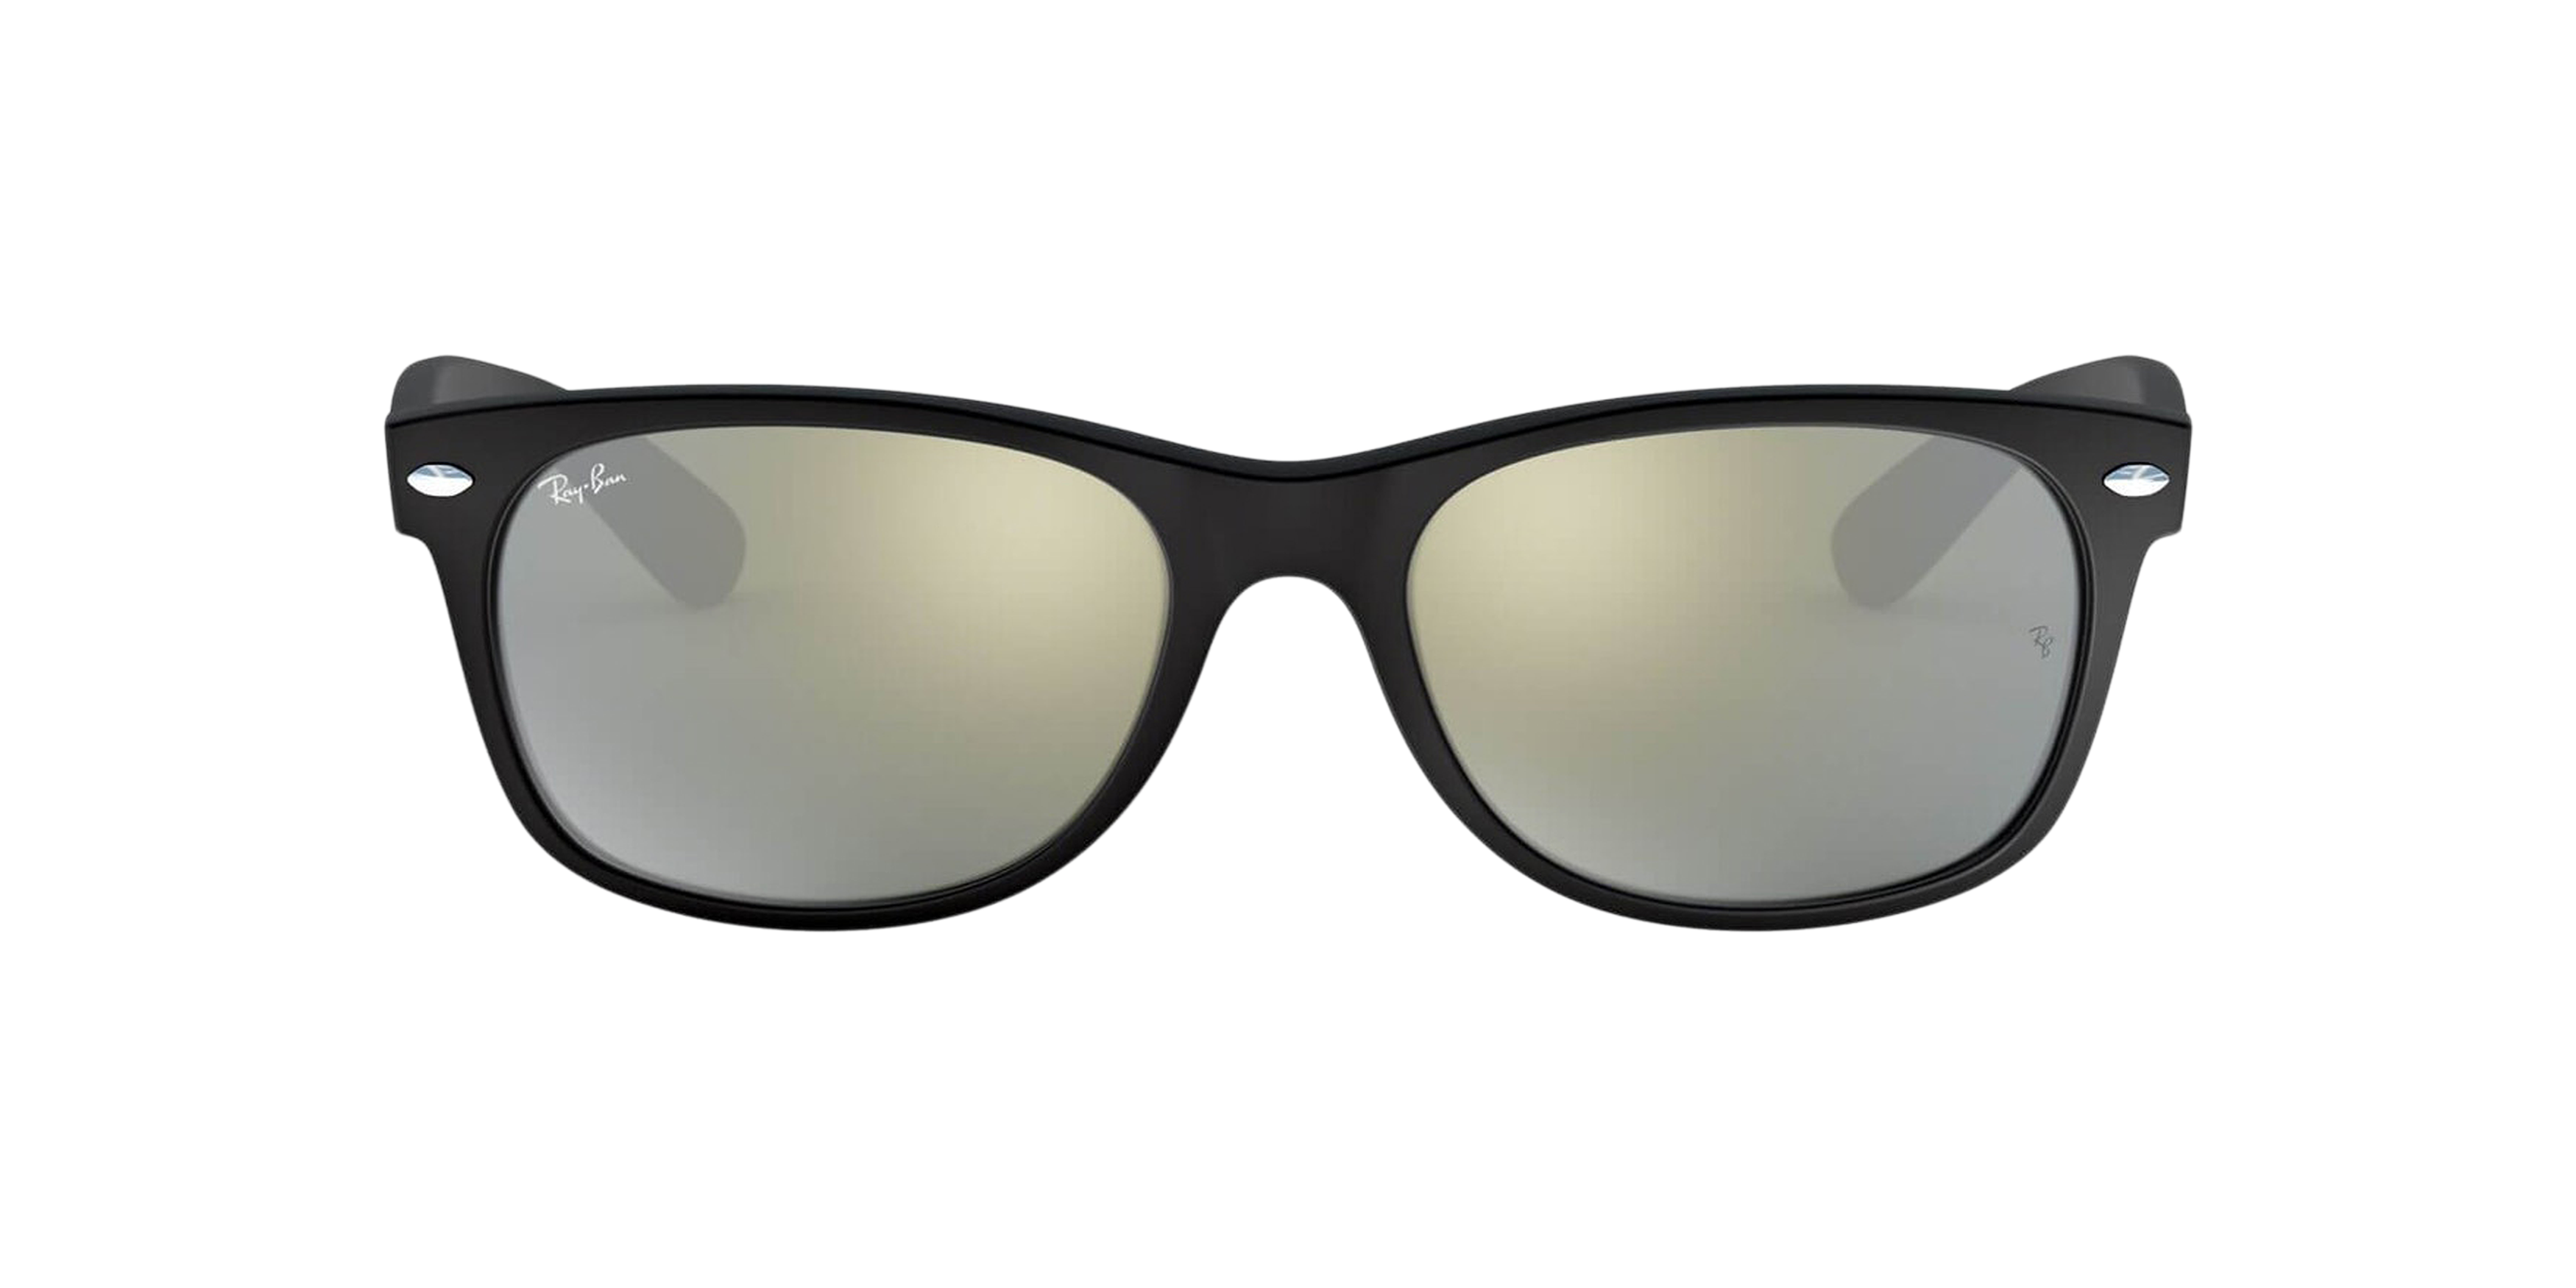 [products.image.front] Ray-Ban New Wayfarer Flash RB2132 622/30